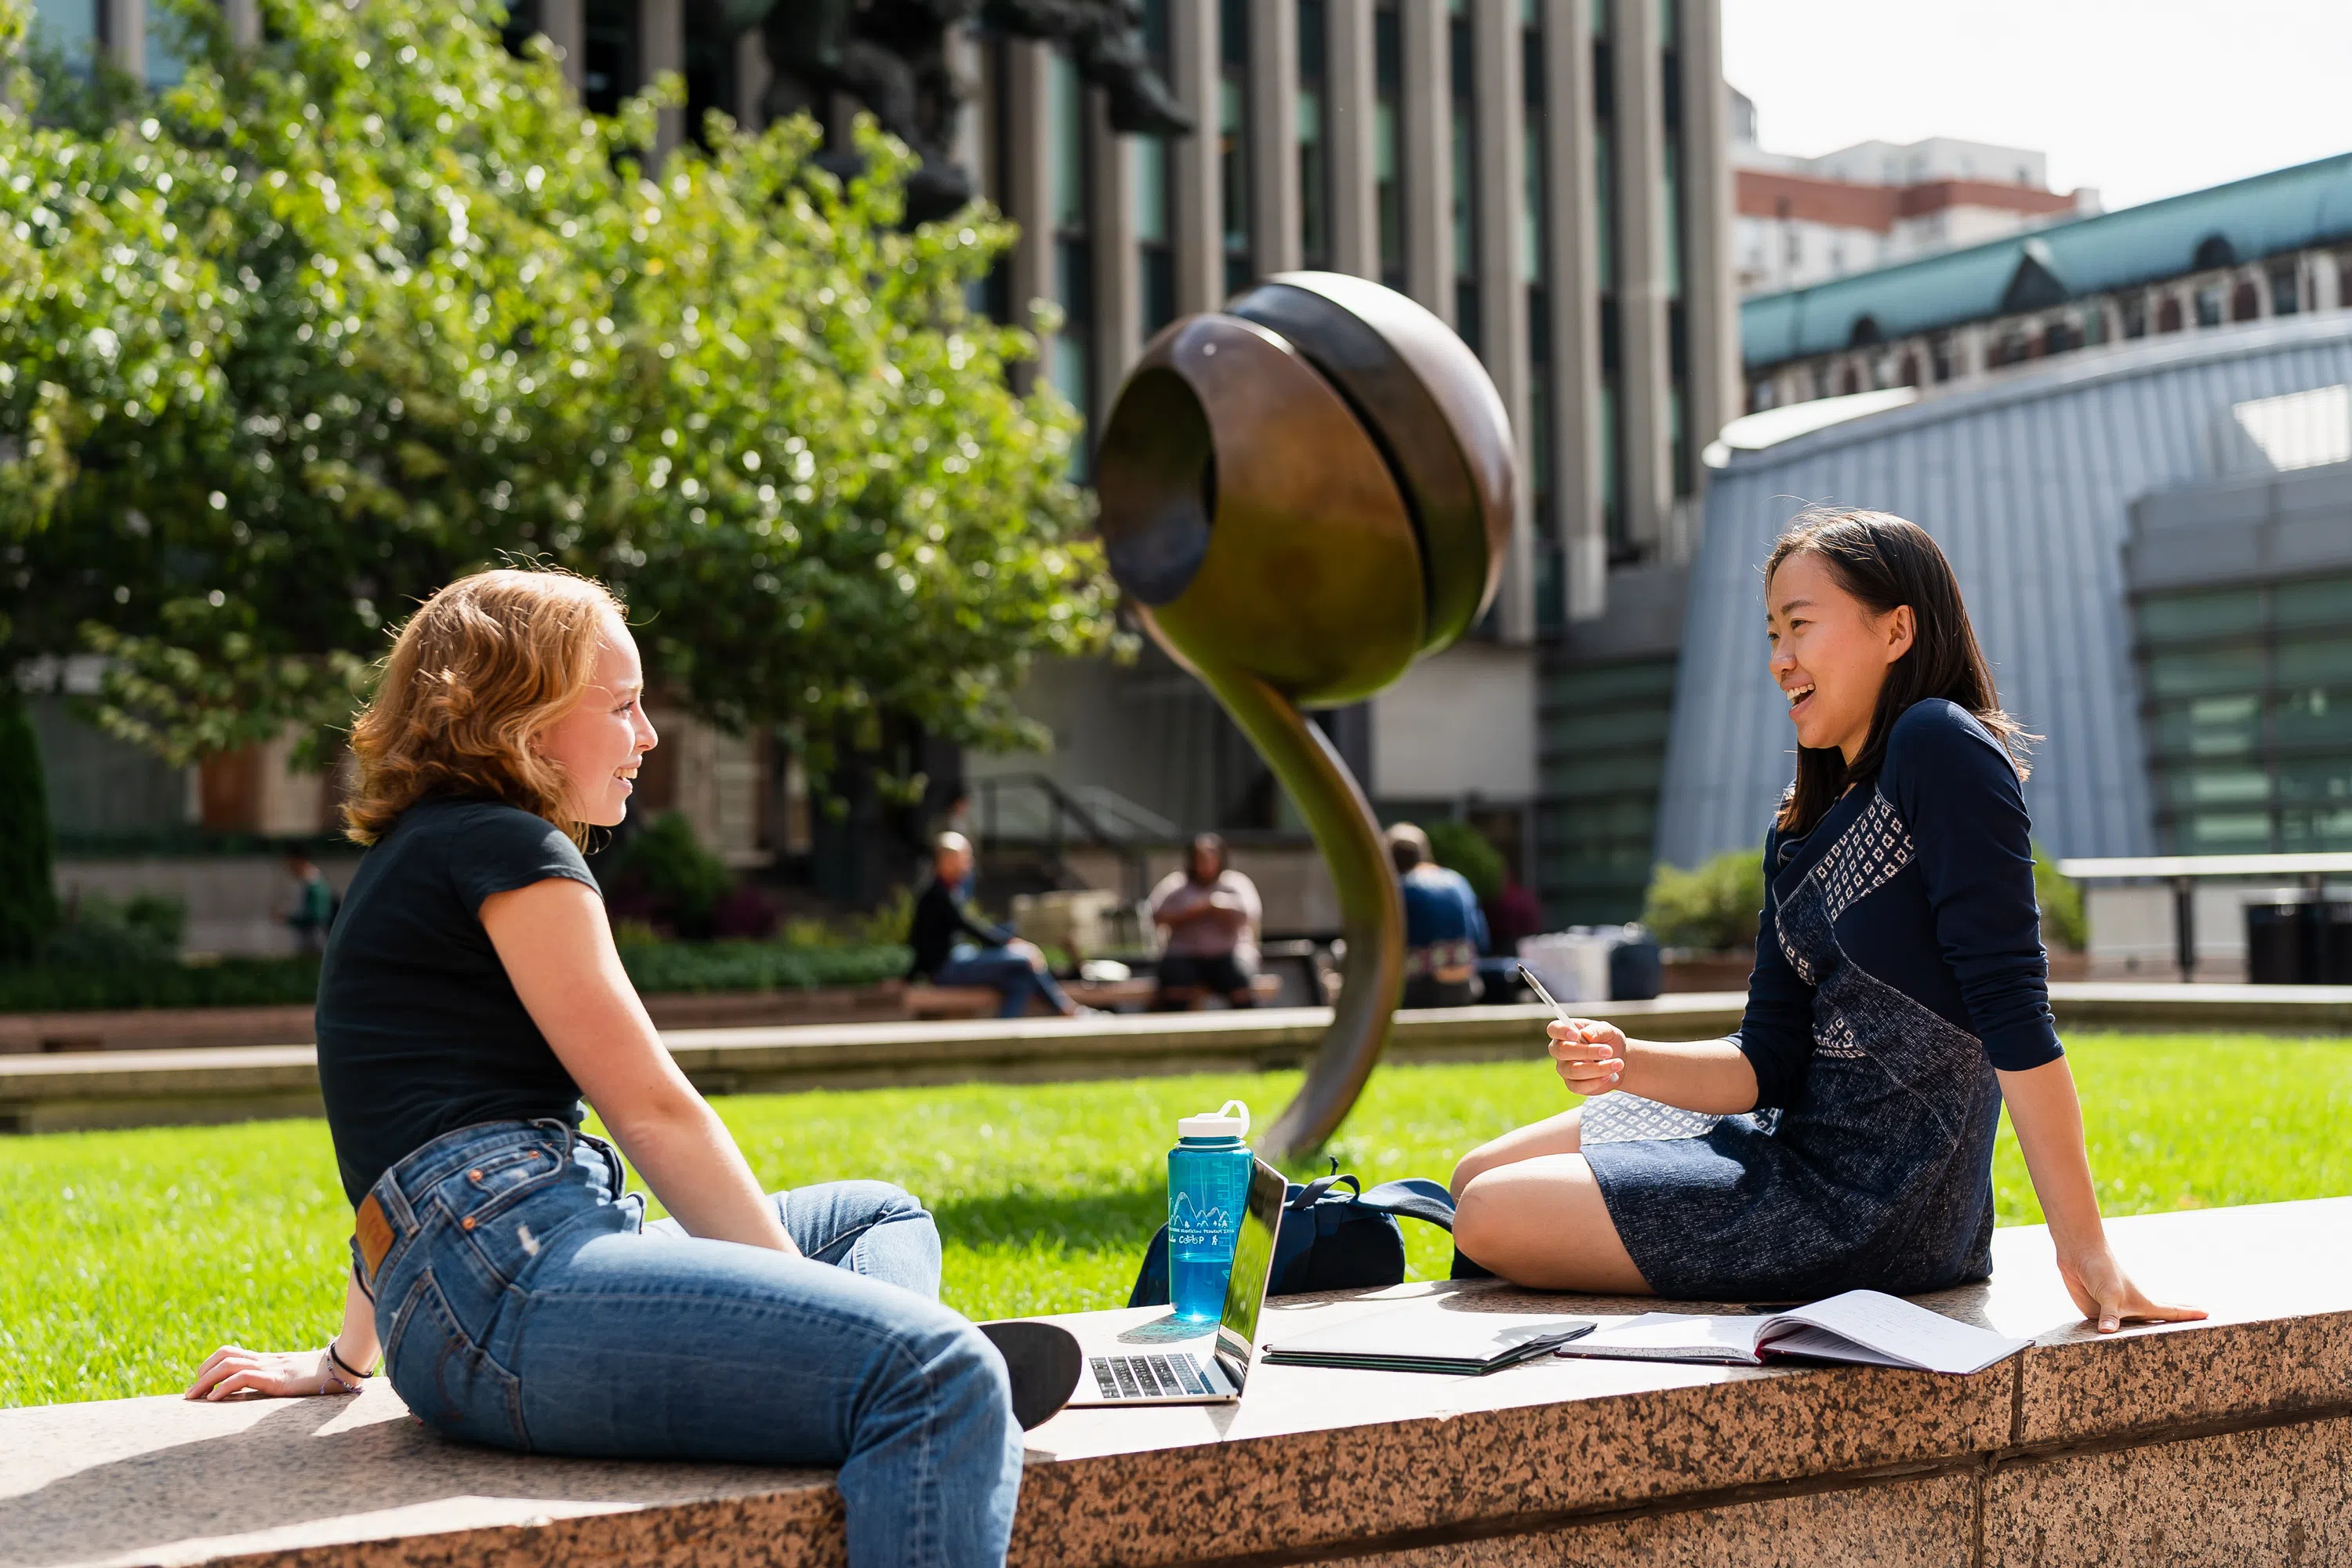 Two students lounge on a stone ledge while talking and laughing. They have books, laptops, and study materials in between them. Being them is sculpture art and lush trees.